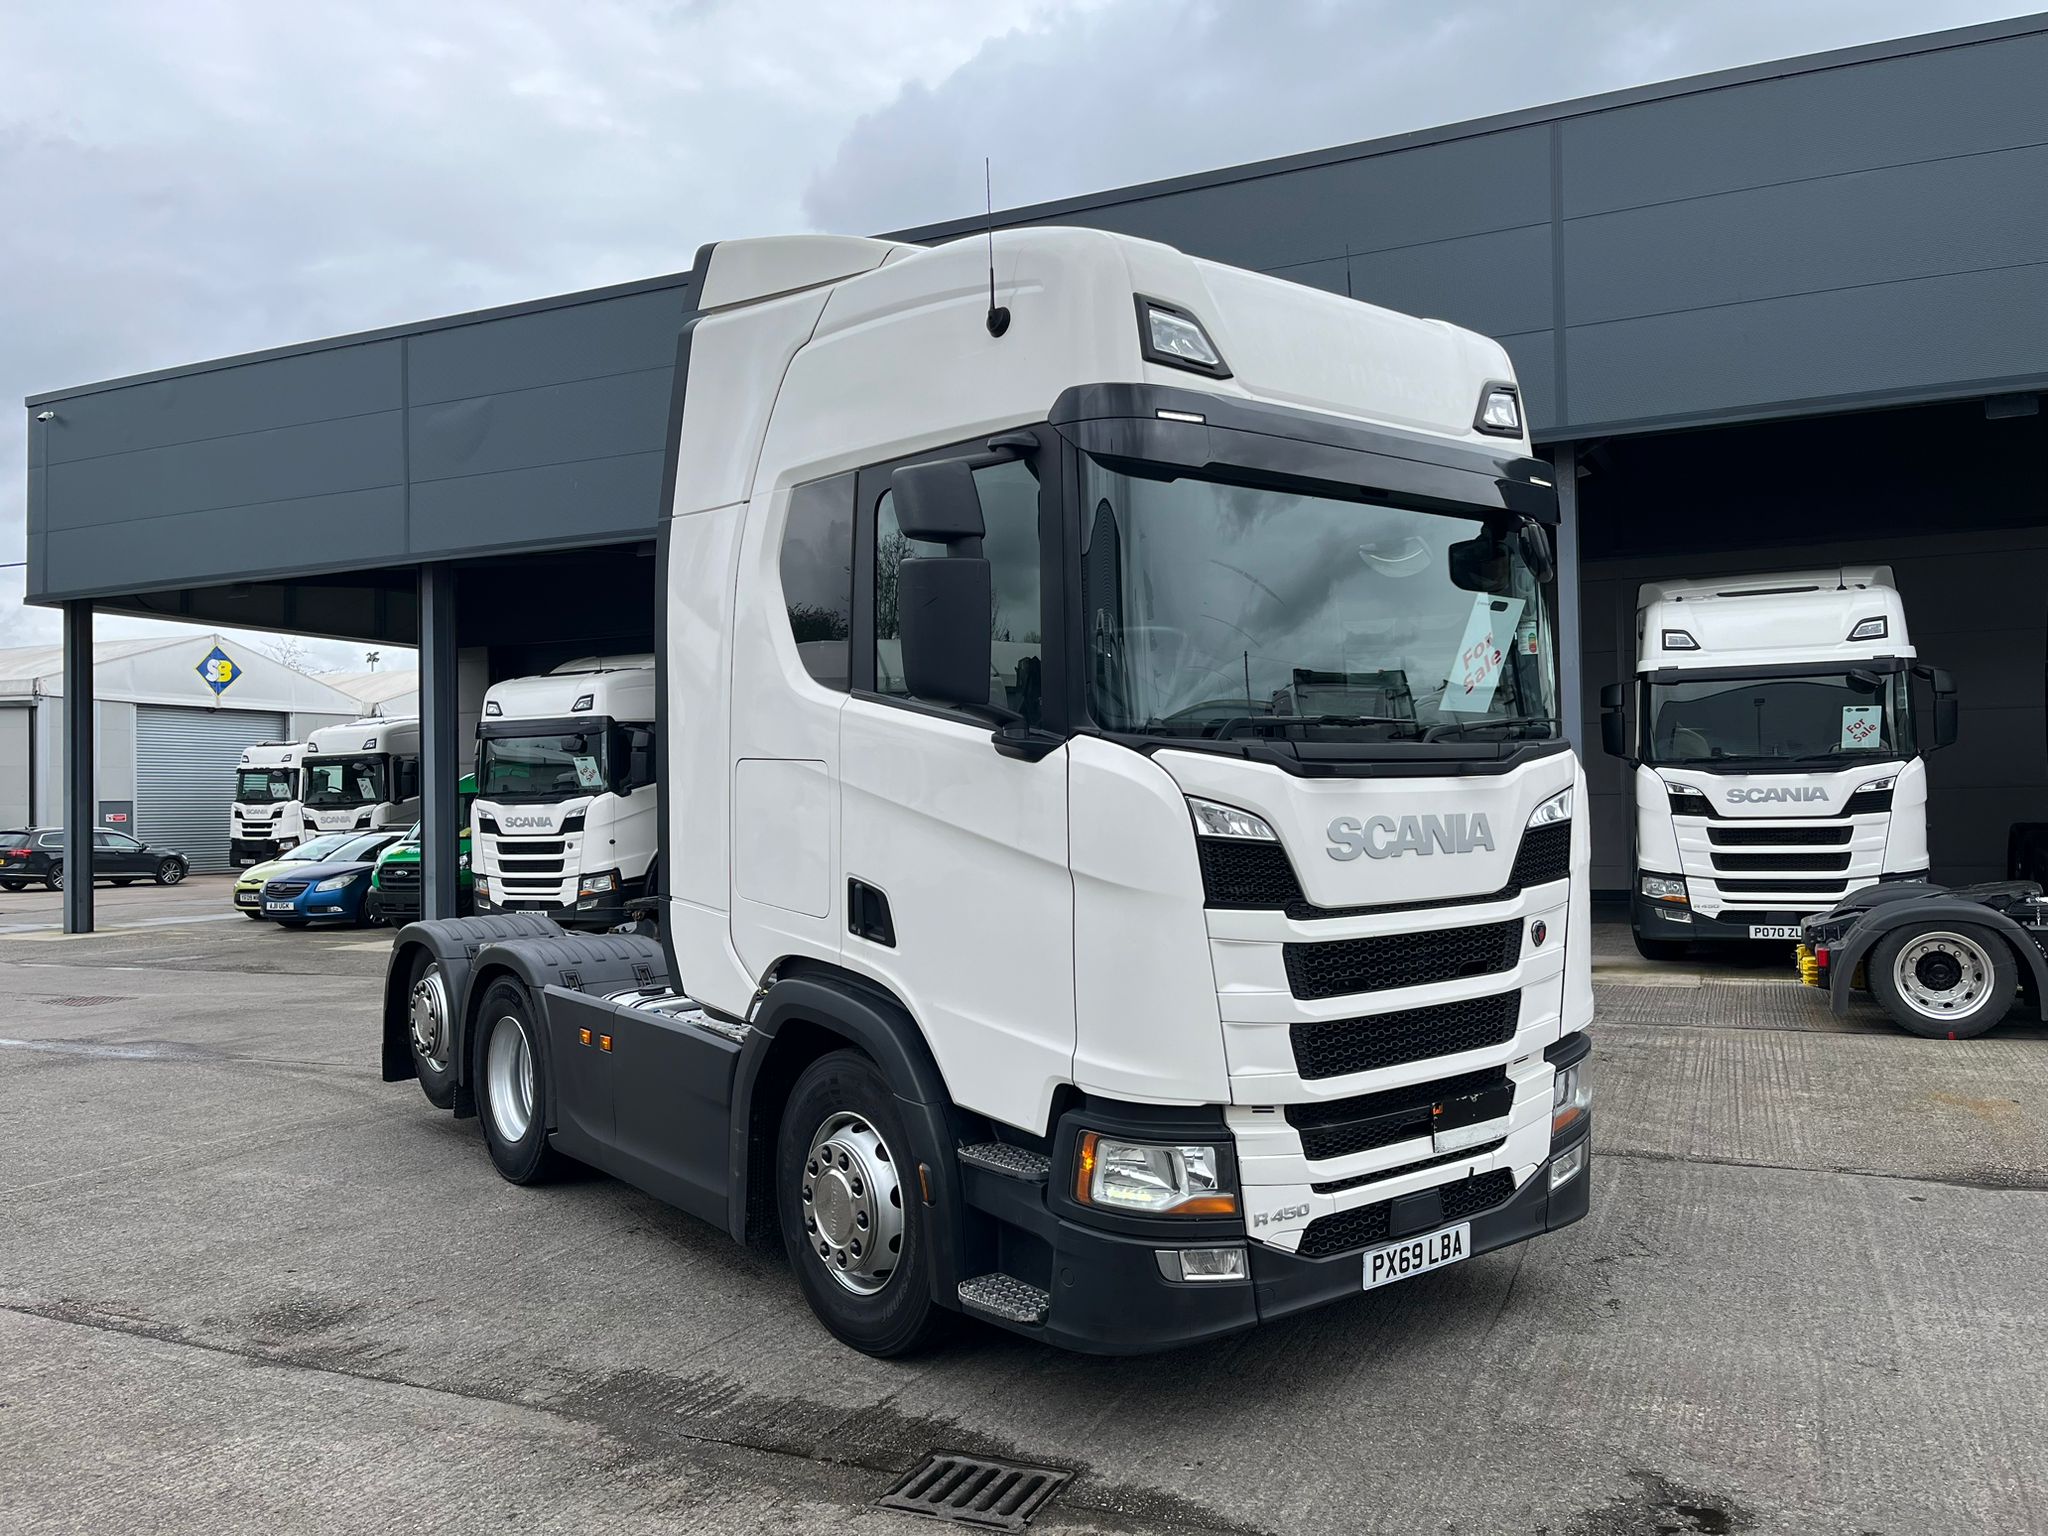 2019 69 Plate SCANIA R450 Highline Tag with Walking Floor Hydraulics – PX69LBA